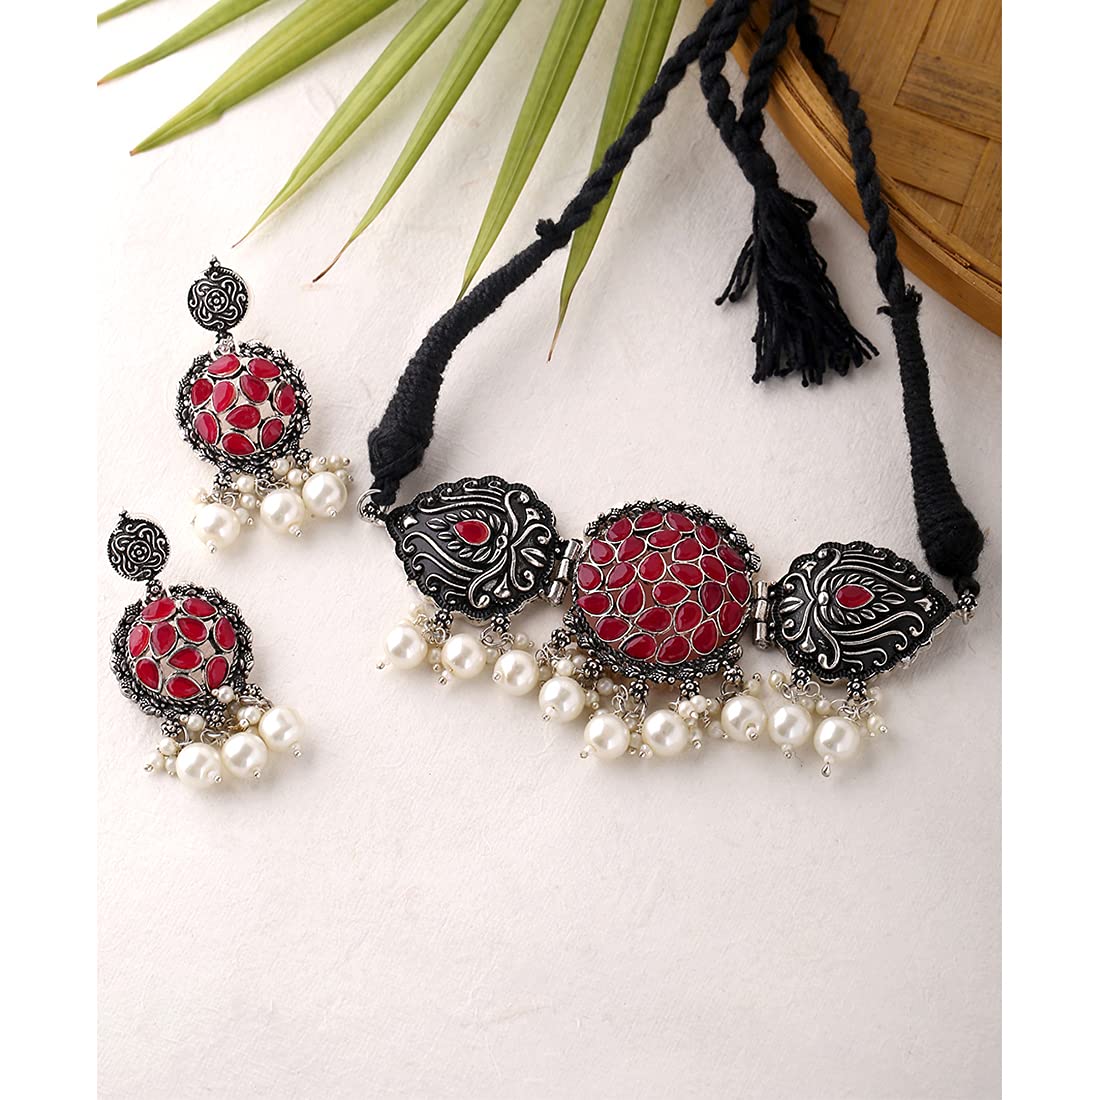 Yellow Chimes Oxidised Jewellery Set for Women Silver Oxidised Jewellery Set Pink Stone Peacock Design Traditional Choker Necklace Set for Women and Girls.